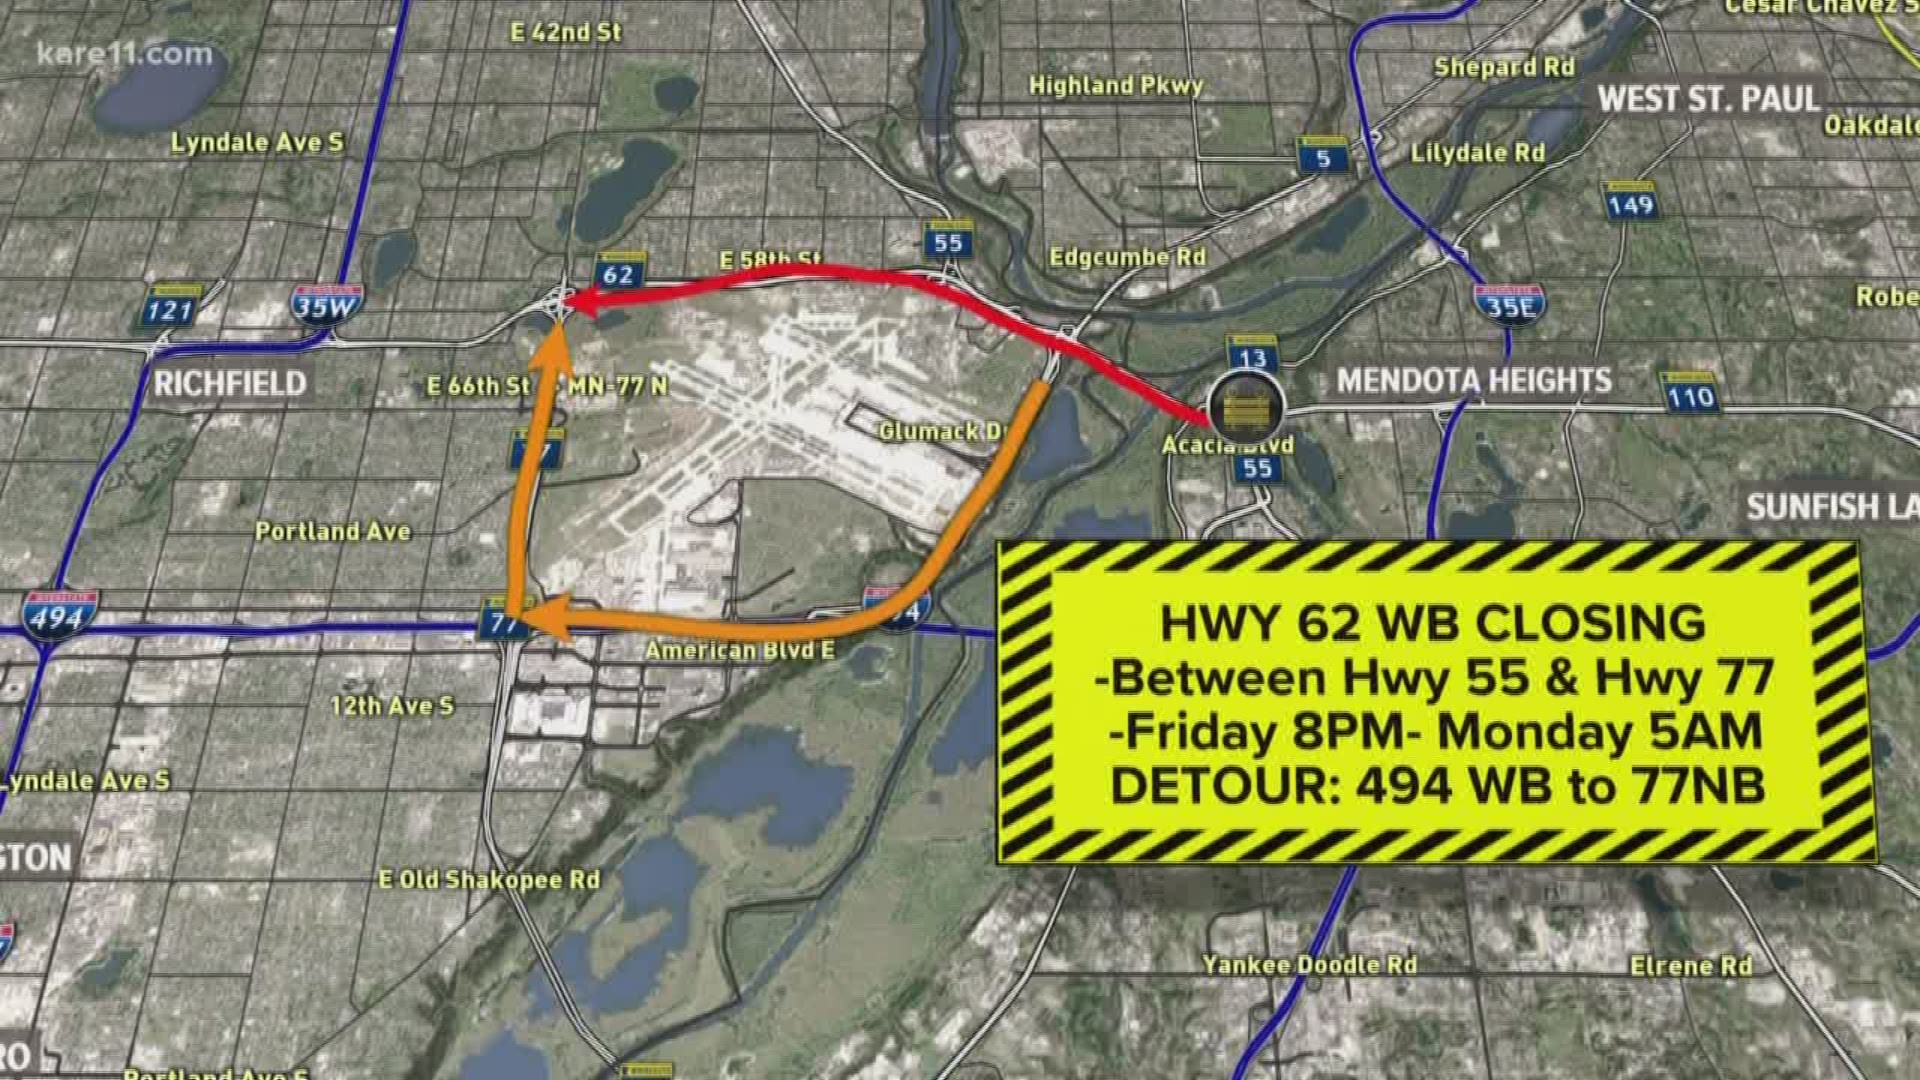 Major road closures could slow down your weekend